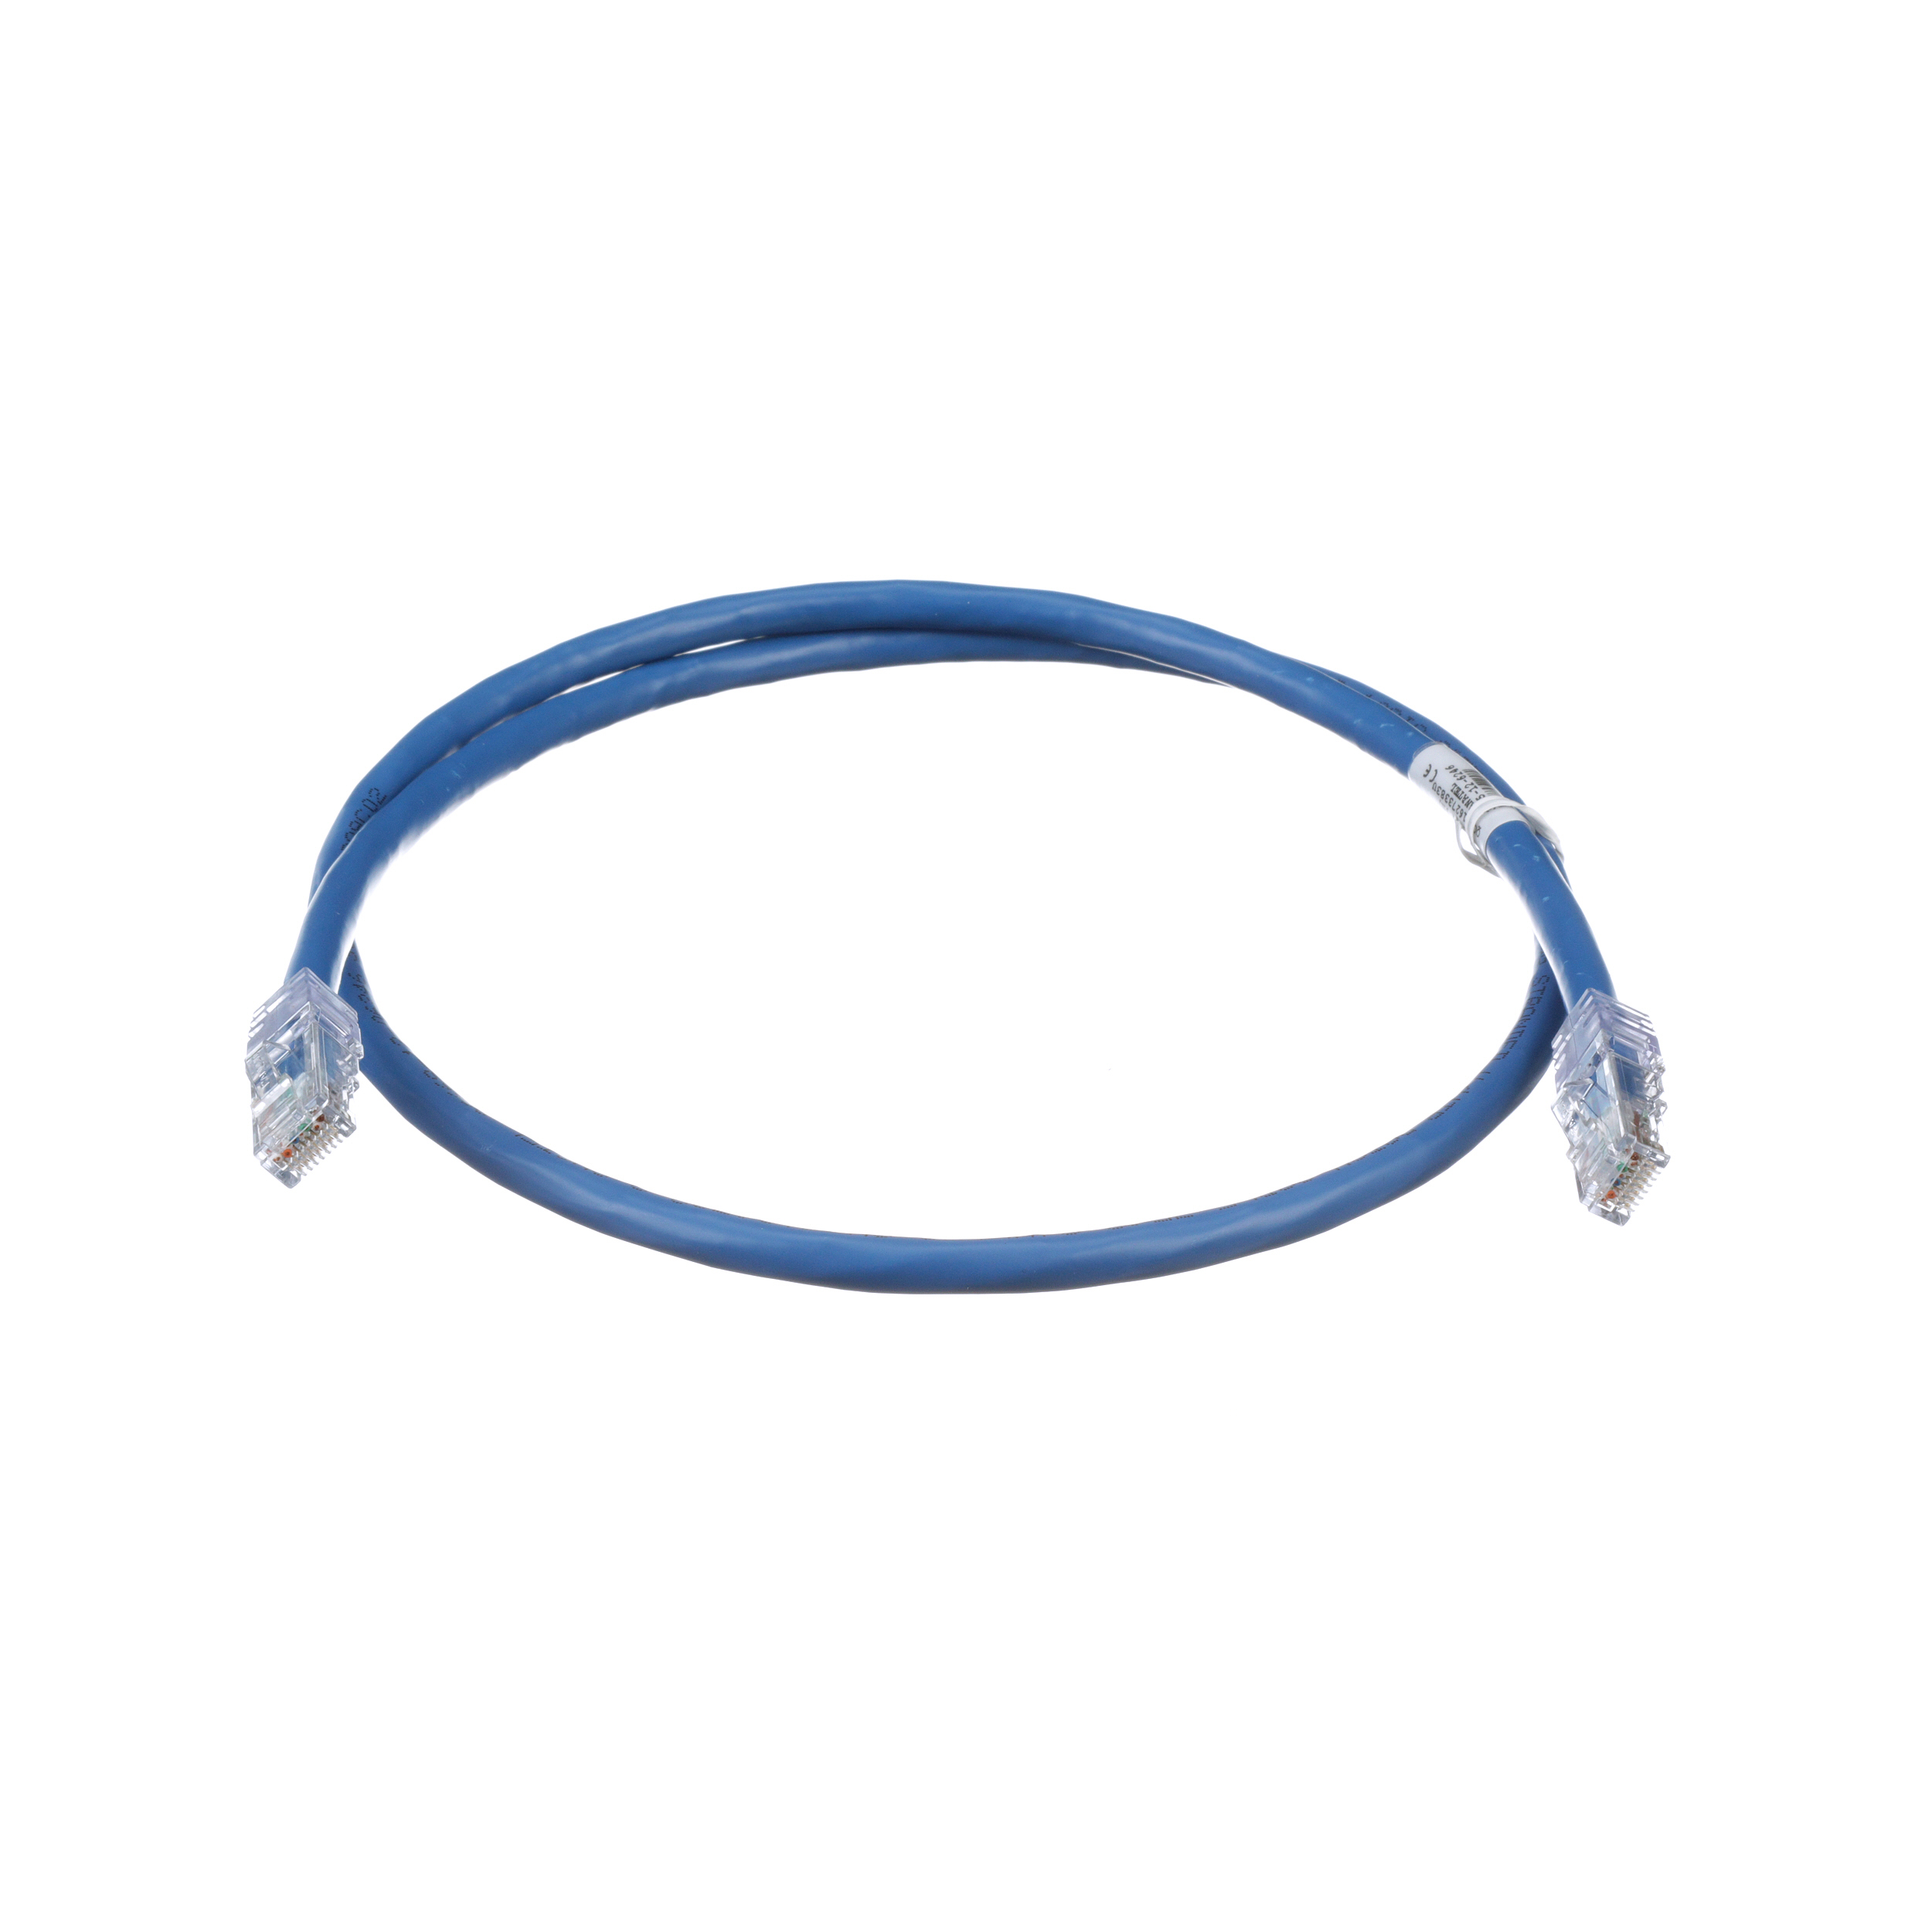 Patch cord, 24 AWG, Cat. 6A, RJ45, 15M,